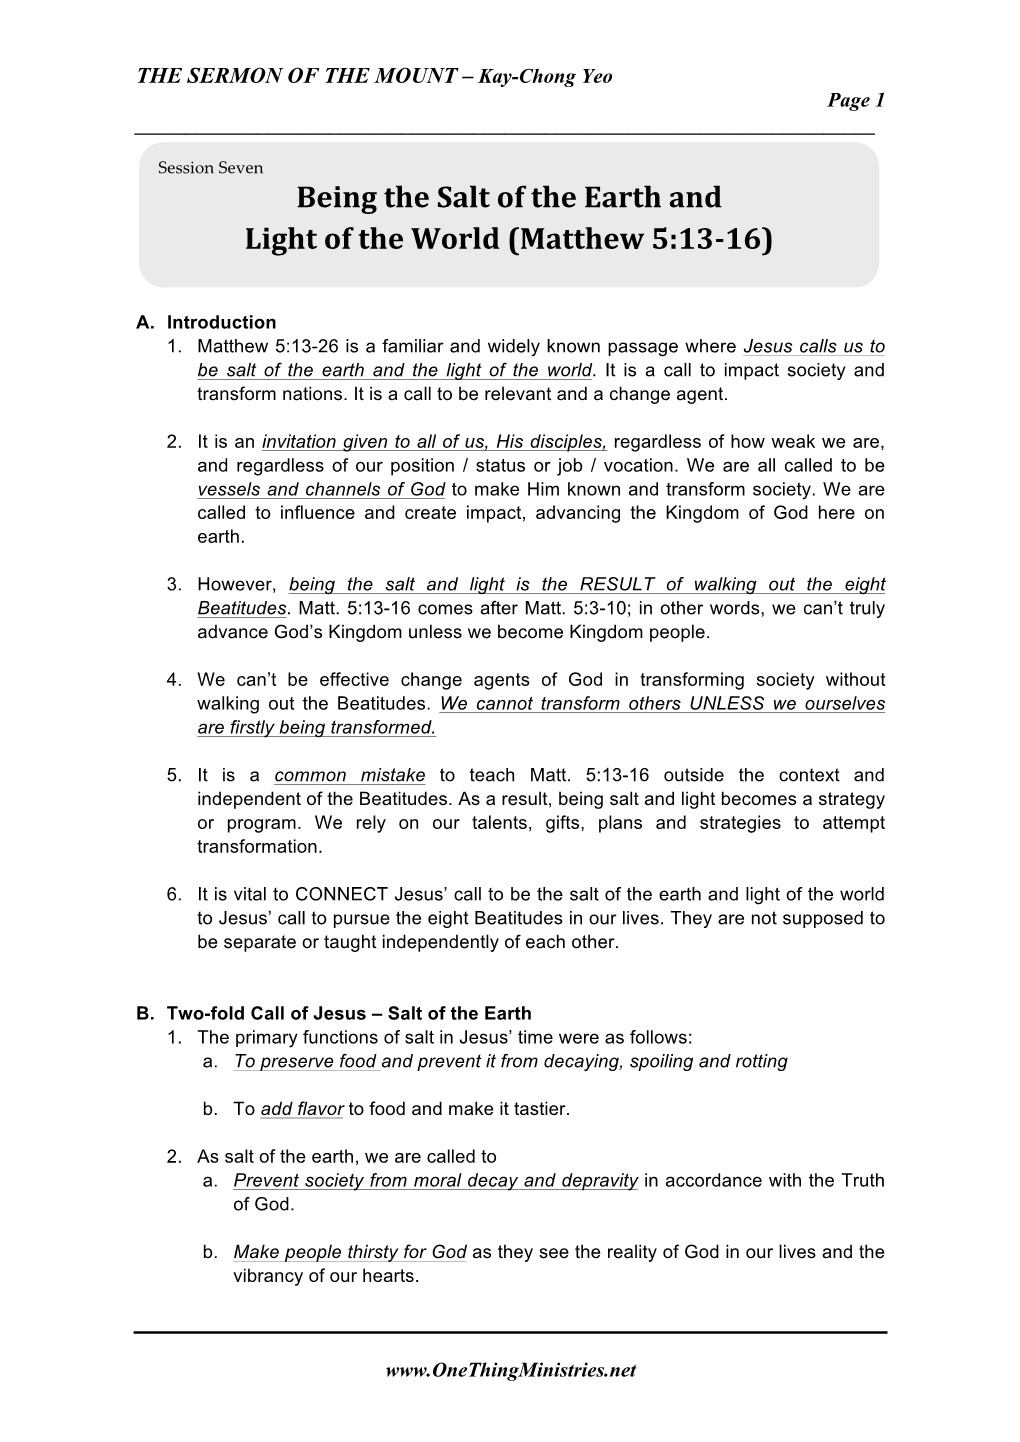 Being the Salt of the Earth and Light of the World (Matthew 5:13-‐16)